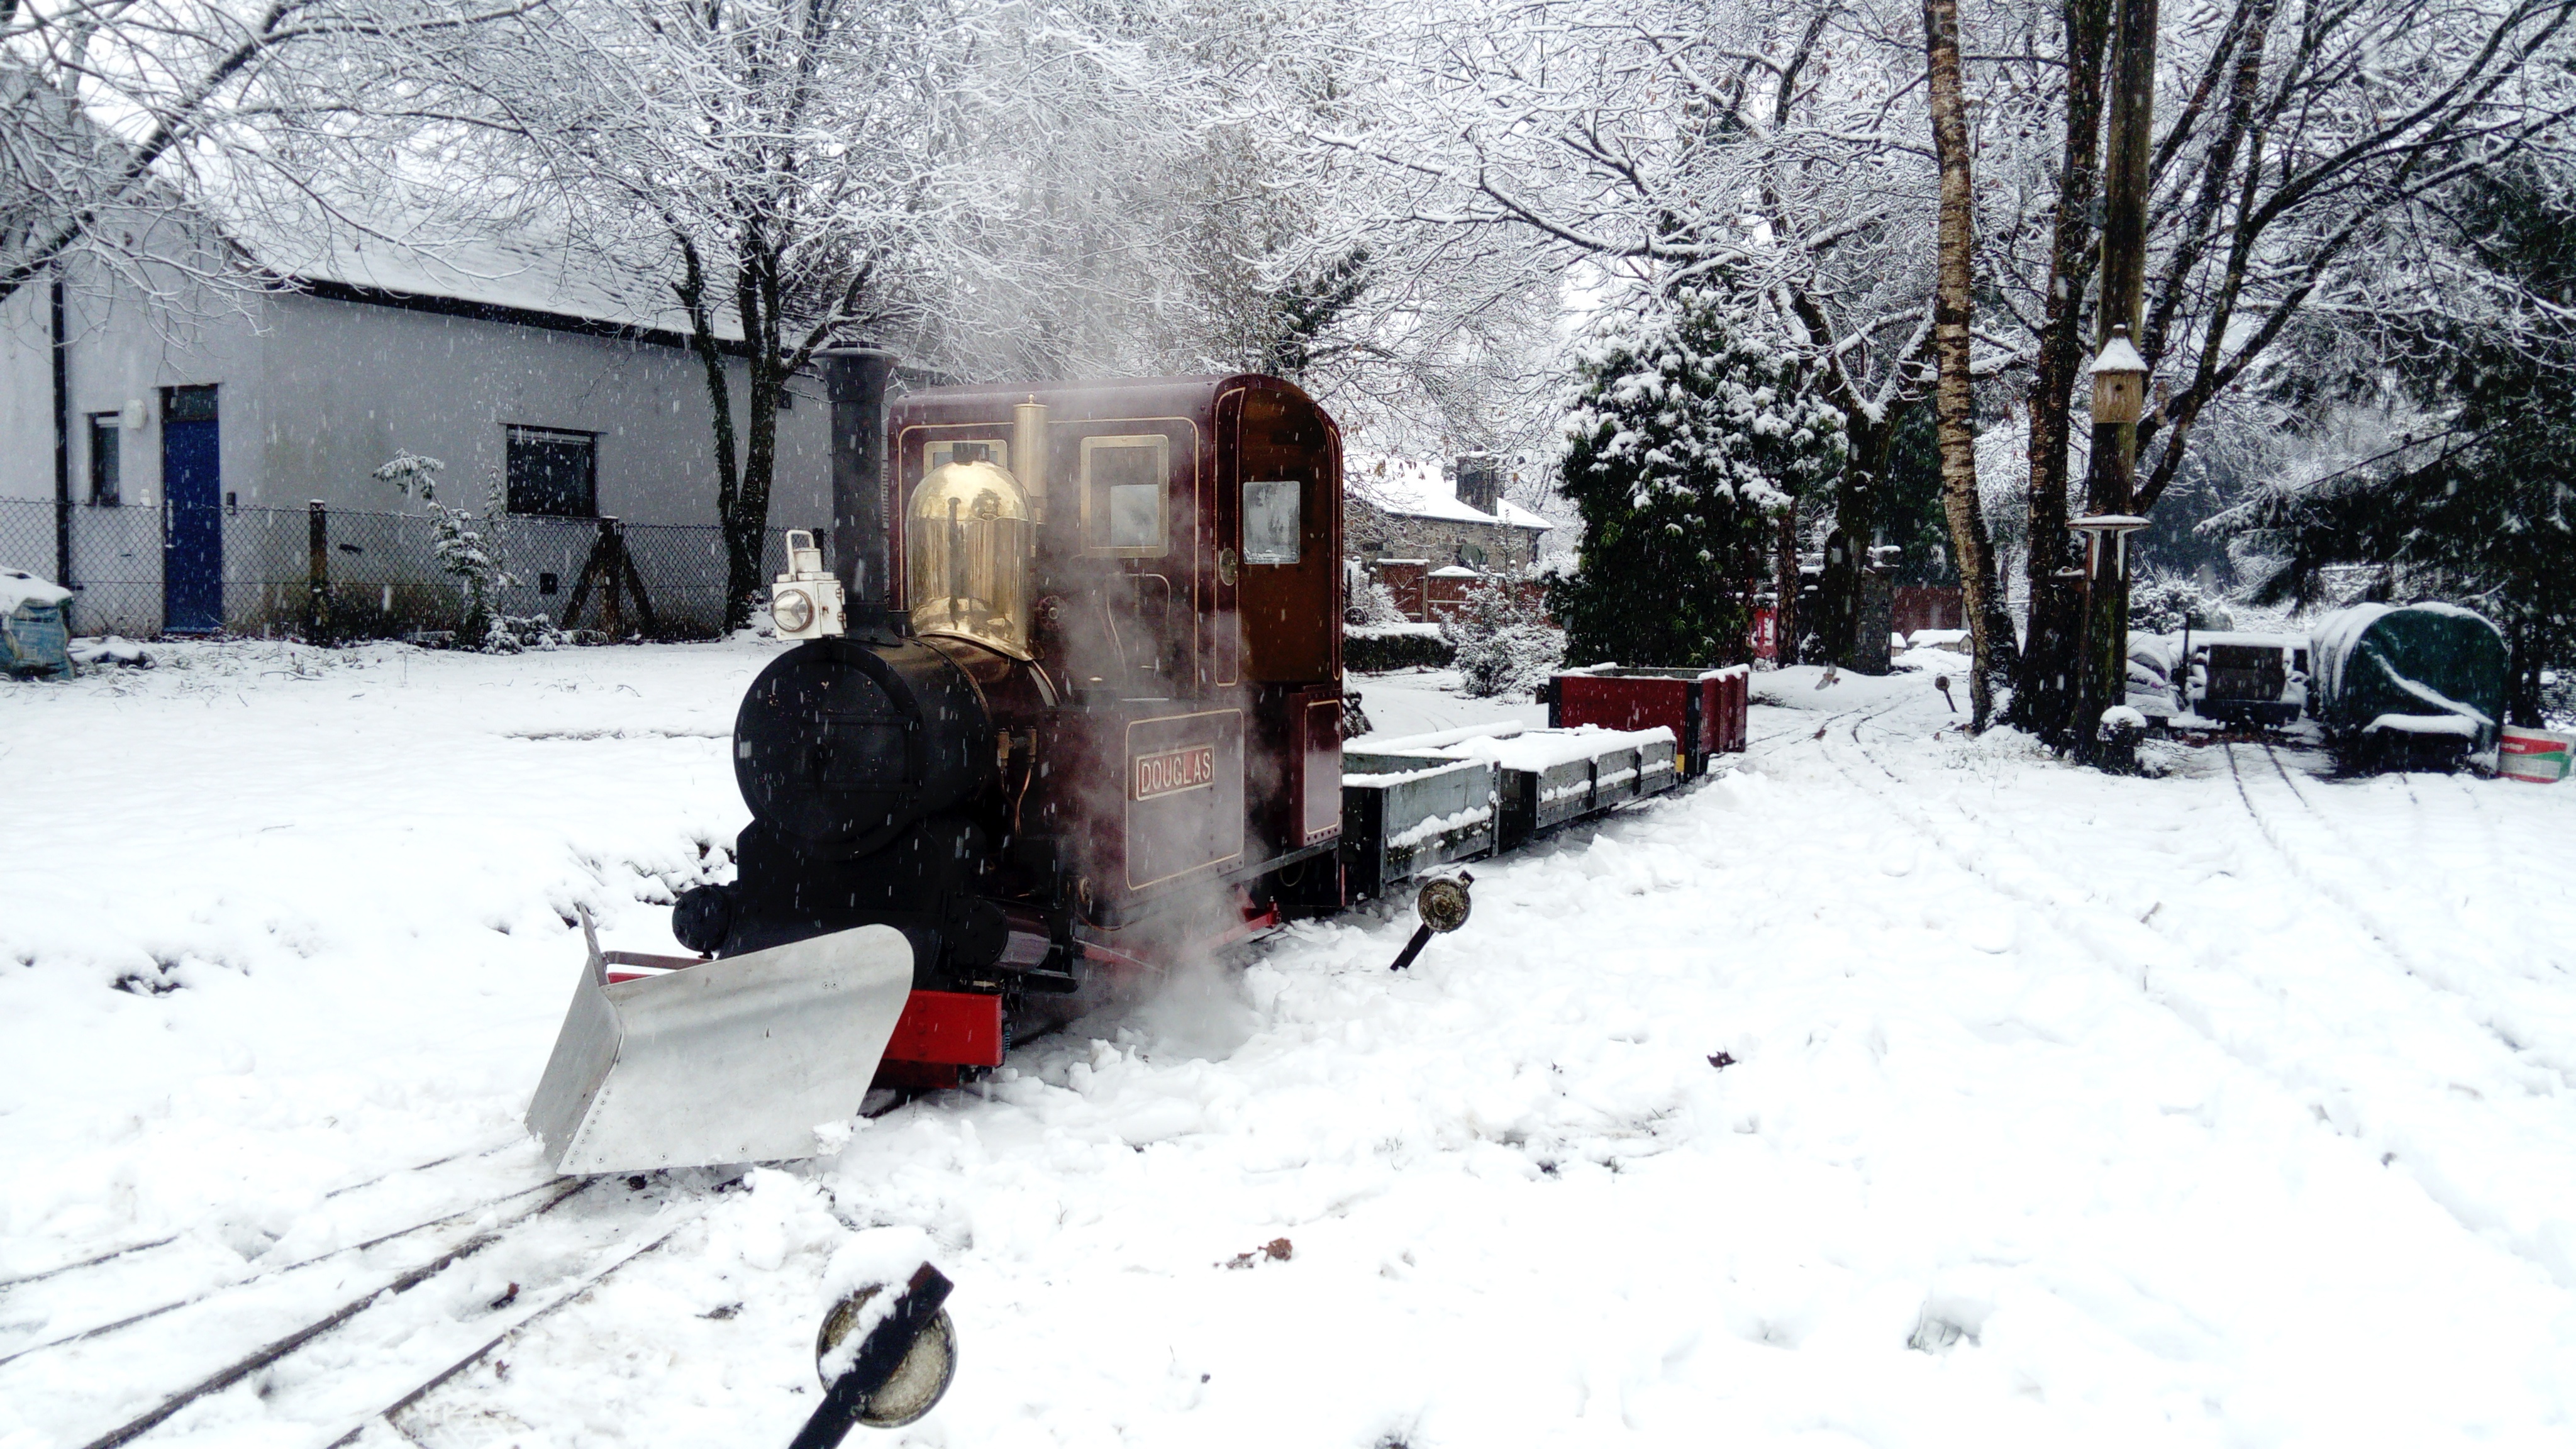 Douglas ready to clear the snow in December 2017